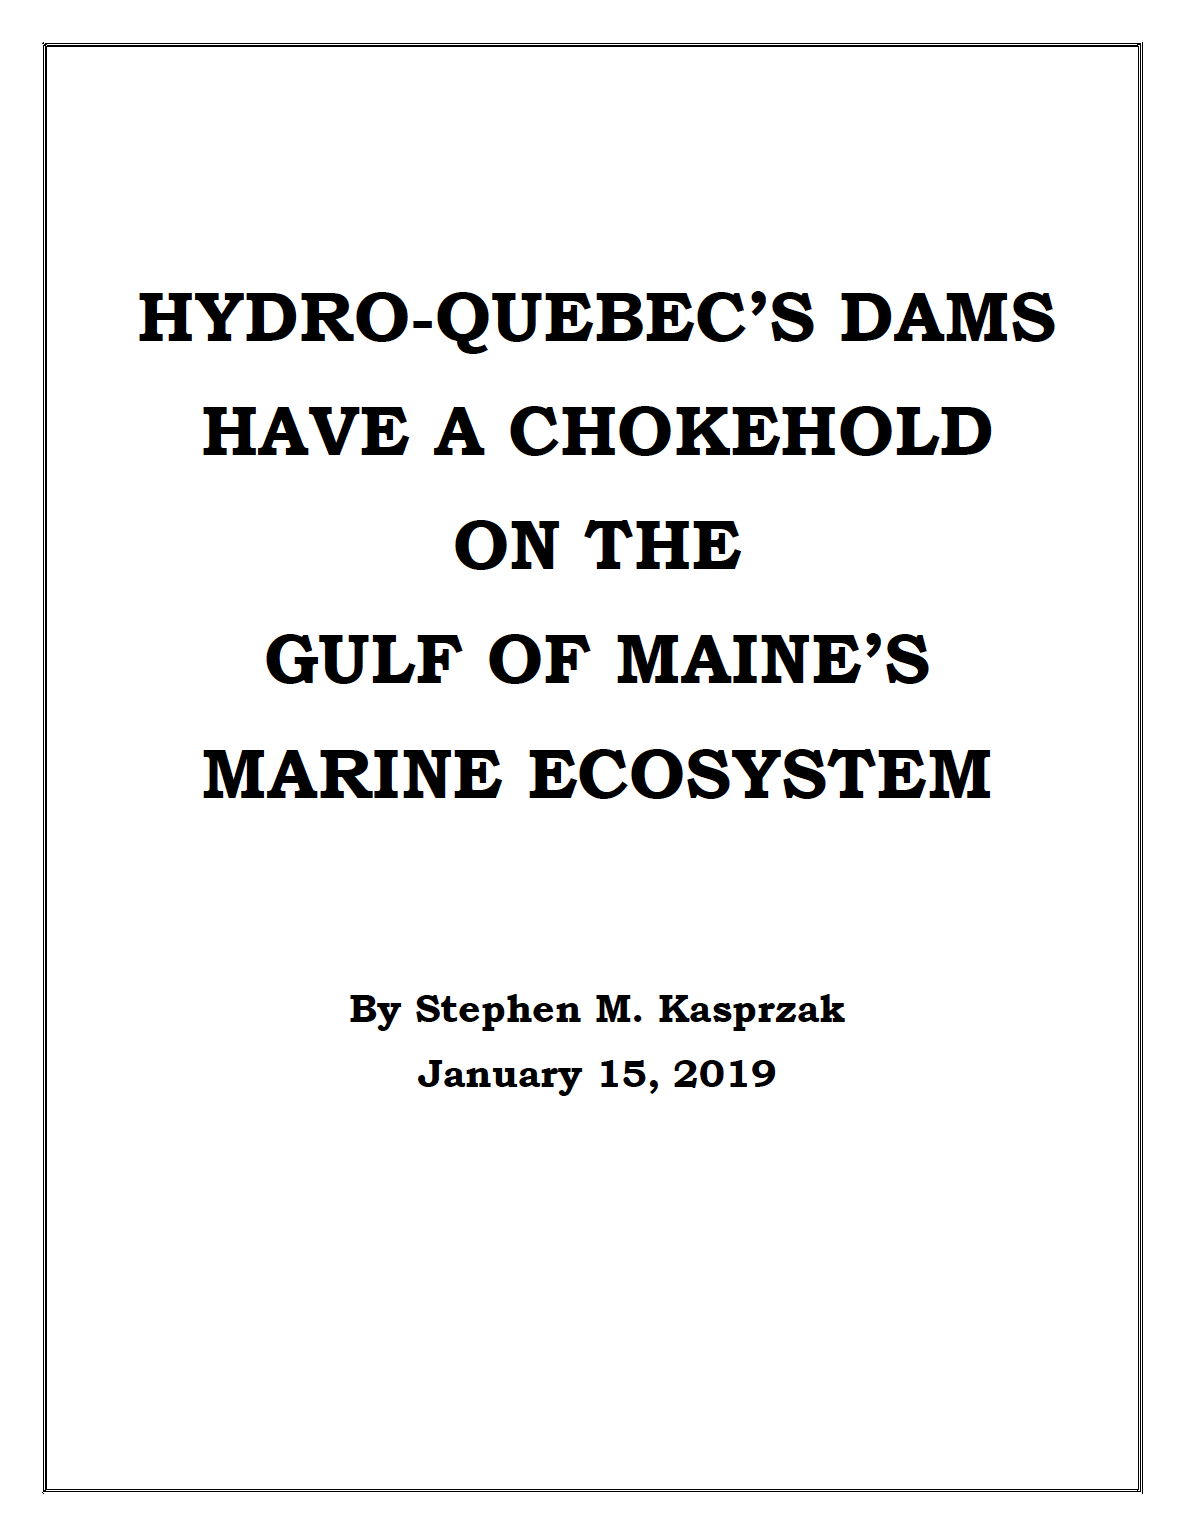 Read more about the article Hydro-Quebec’s Dams have a Chokehold on the Gulf of Maine’s Ecosystem by Stephen Kasprzak